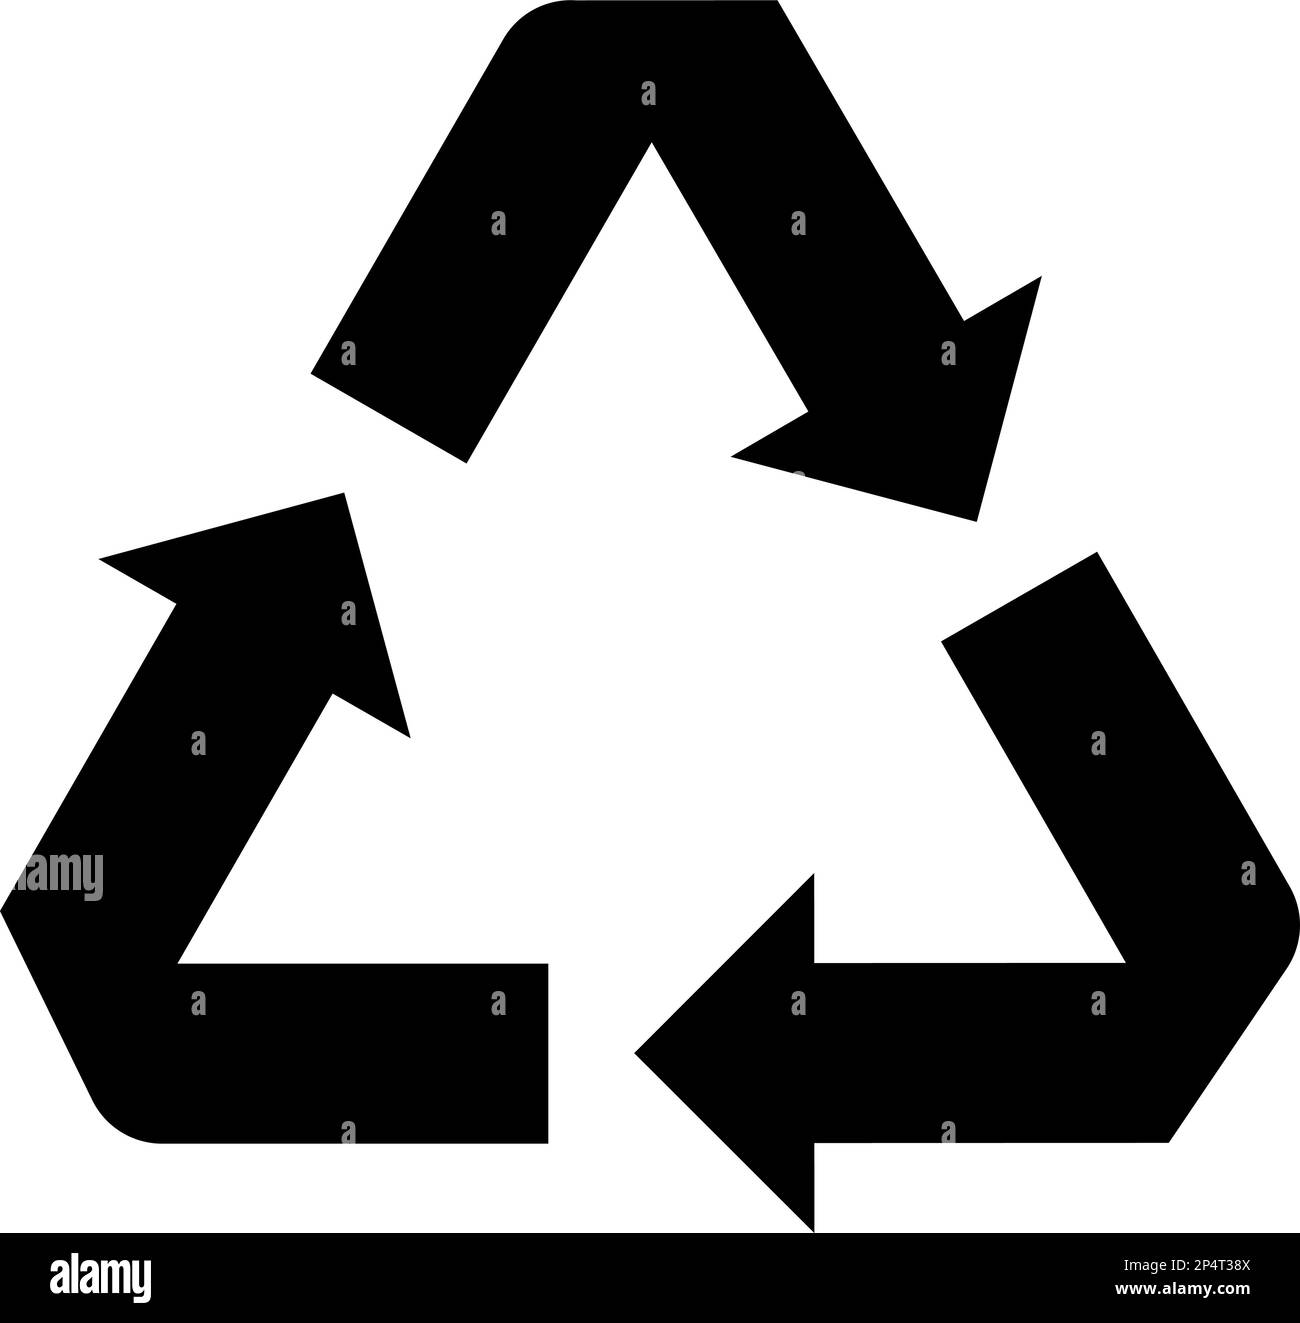 RECYCLE icon as concept of reducing waste Stock Vector